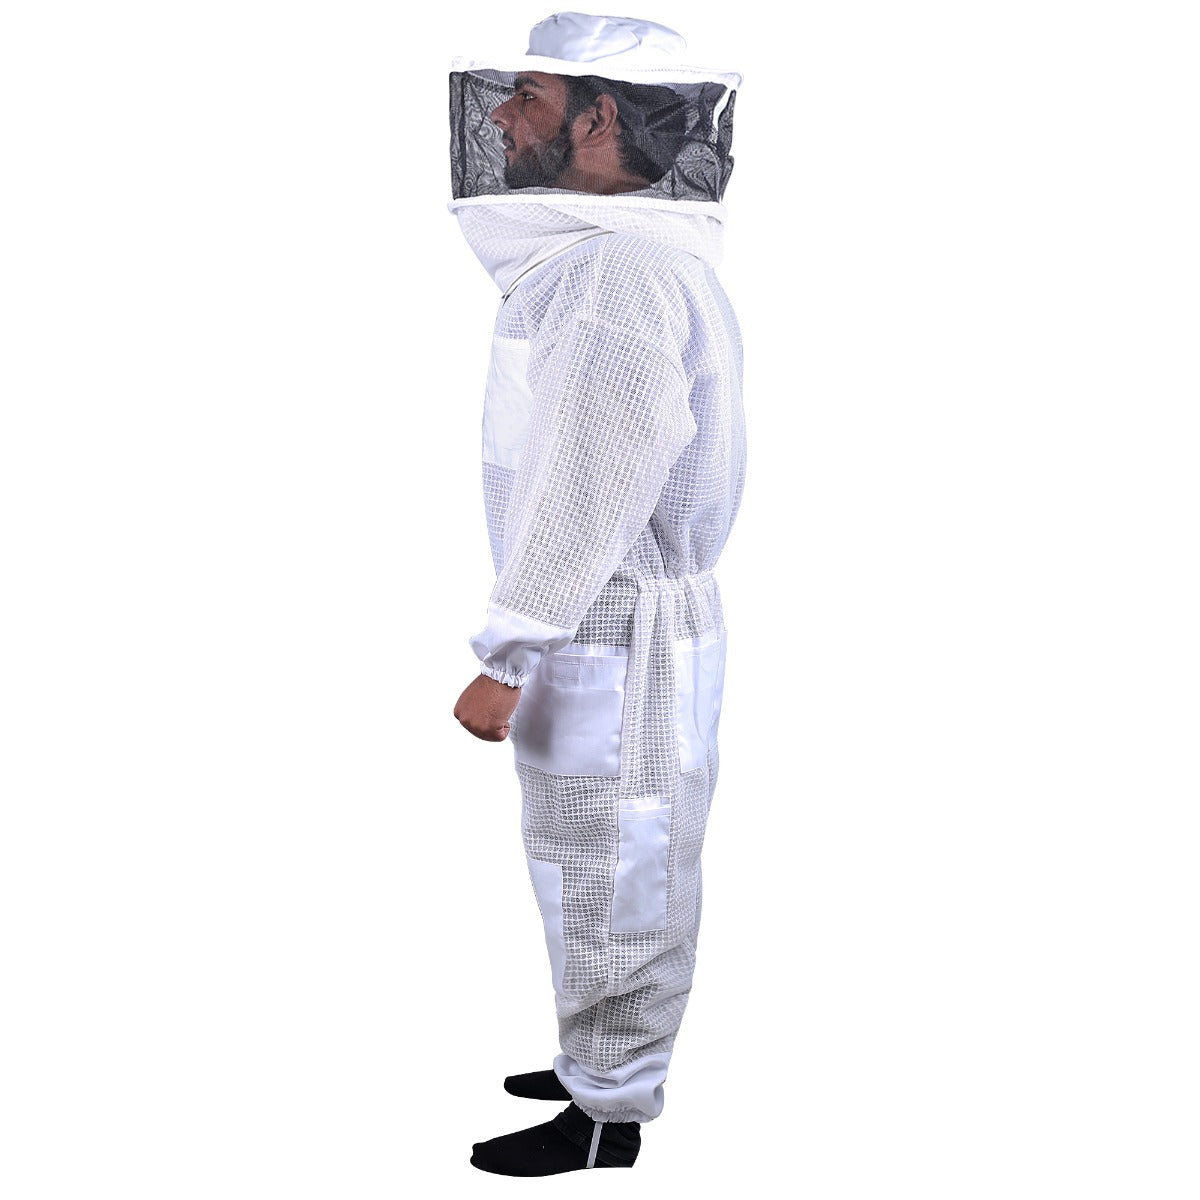 Beekeeping Bee Full Suit 3 Layer Mesh Ultra Cool Ventilated Round Head Beekeeping Protective Gear SIZE 5XL